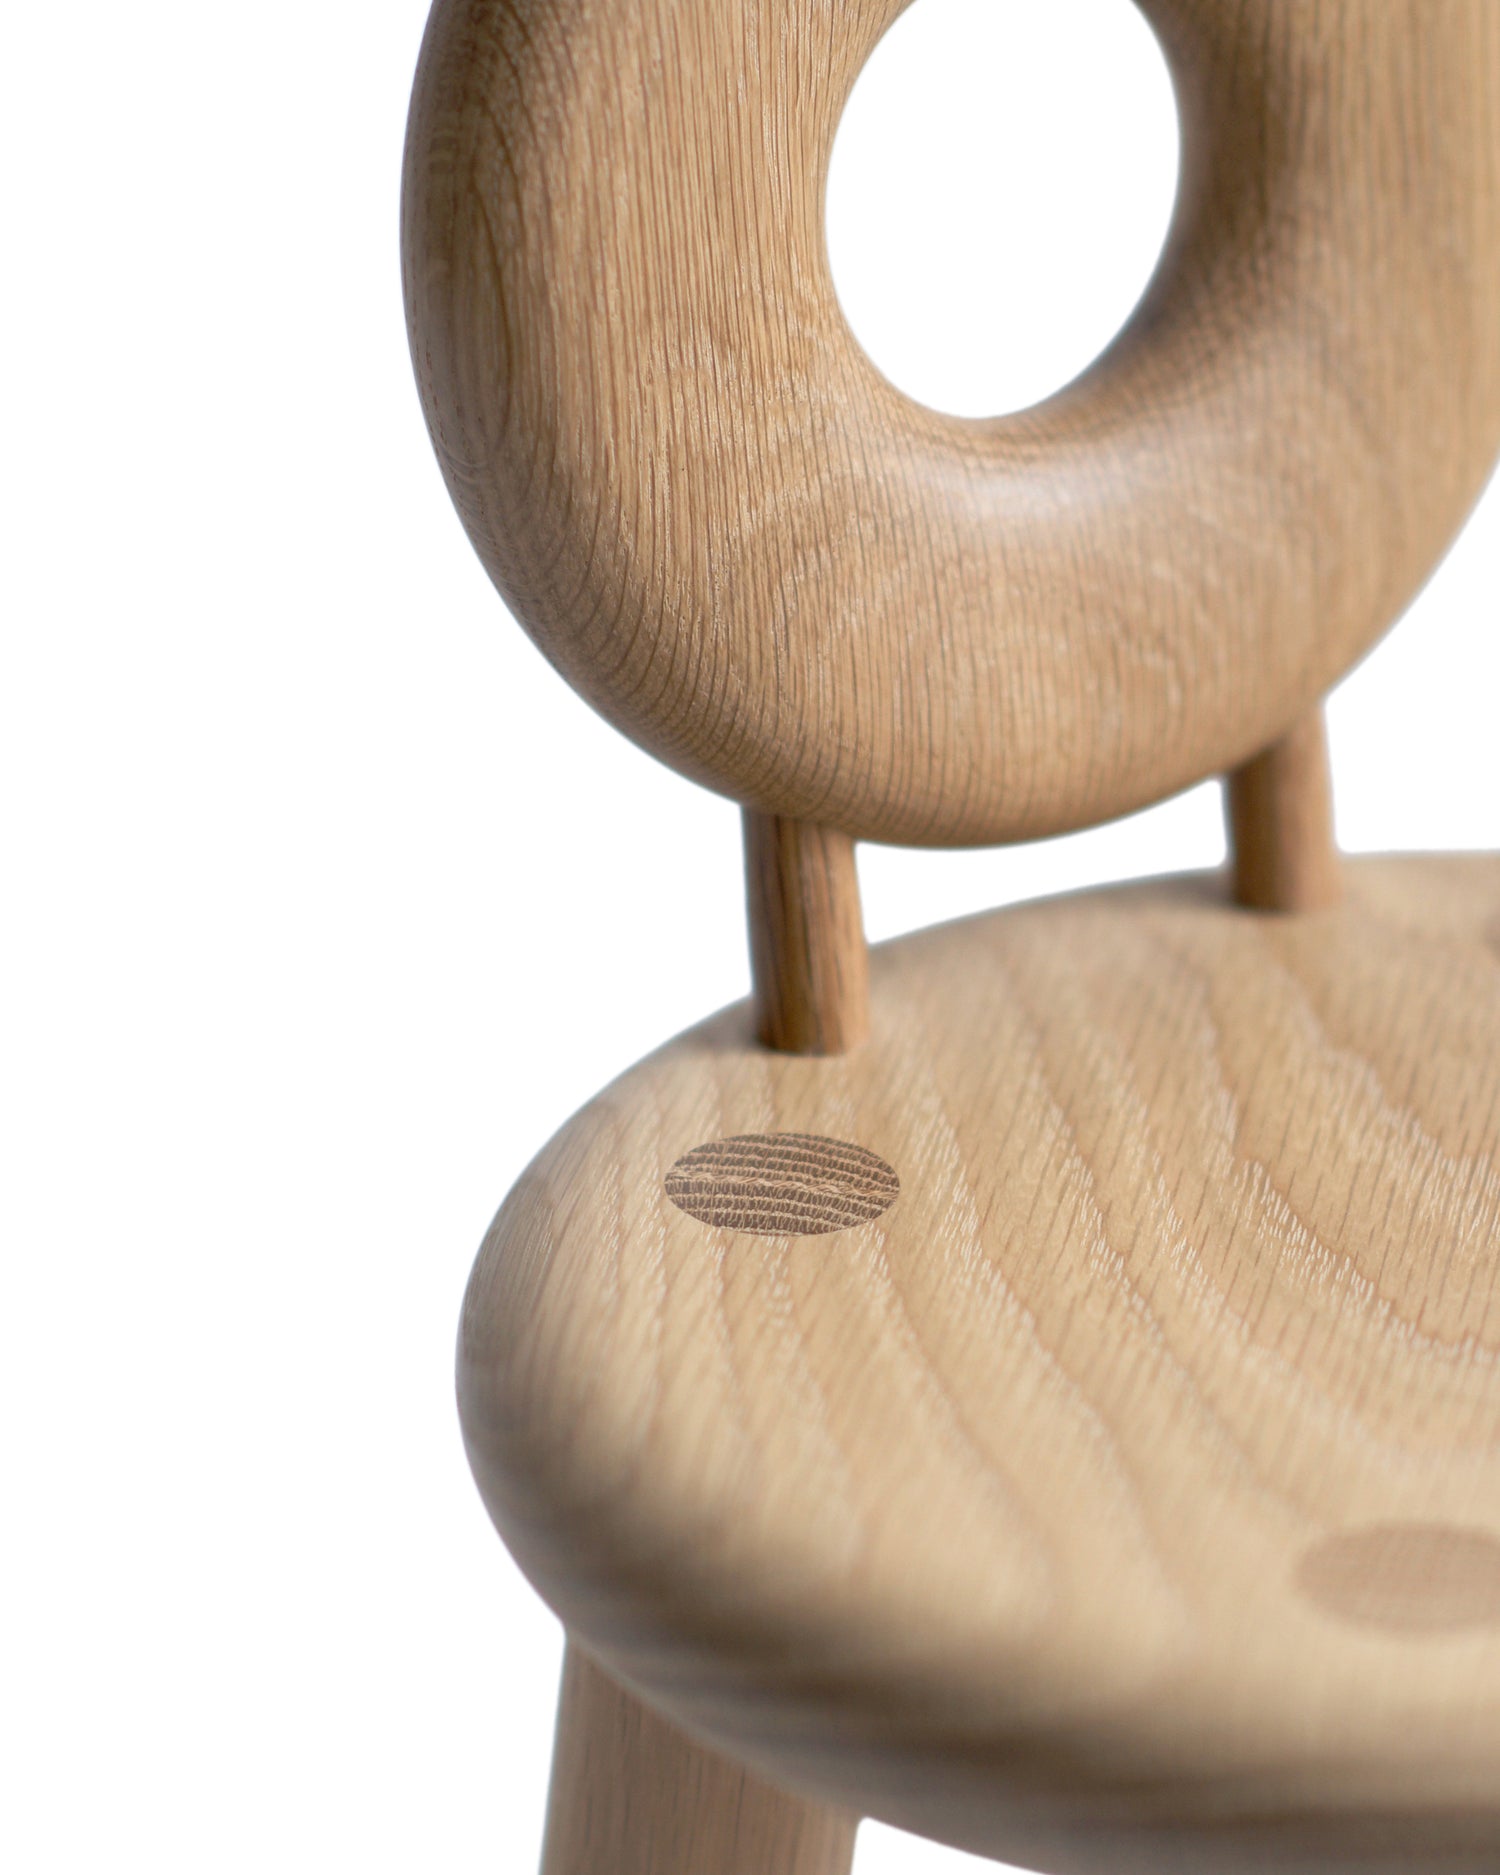 Detailed image of the bialy children's chair, showing details of the wood joinery. Designed by Pat Kim.